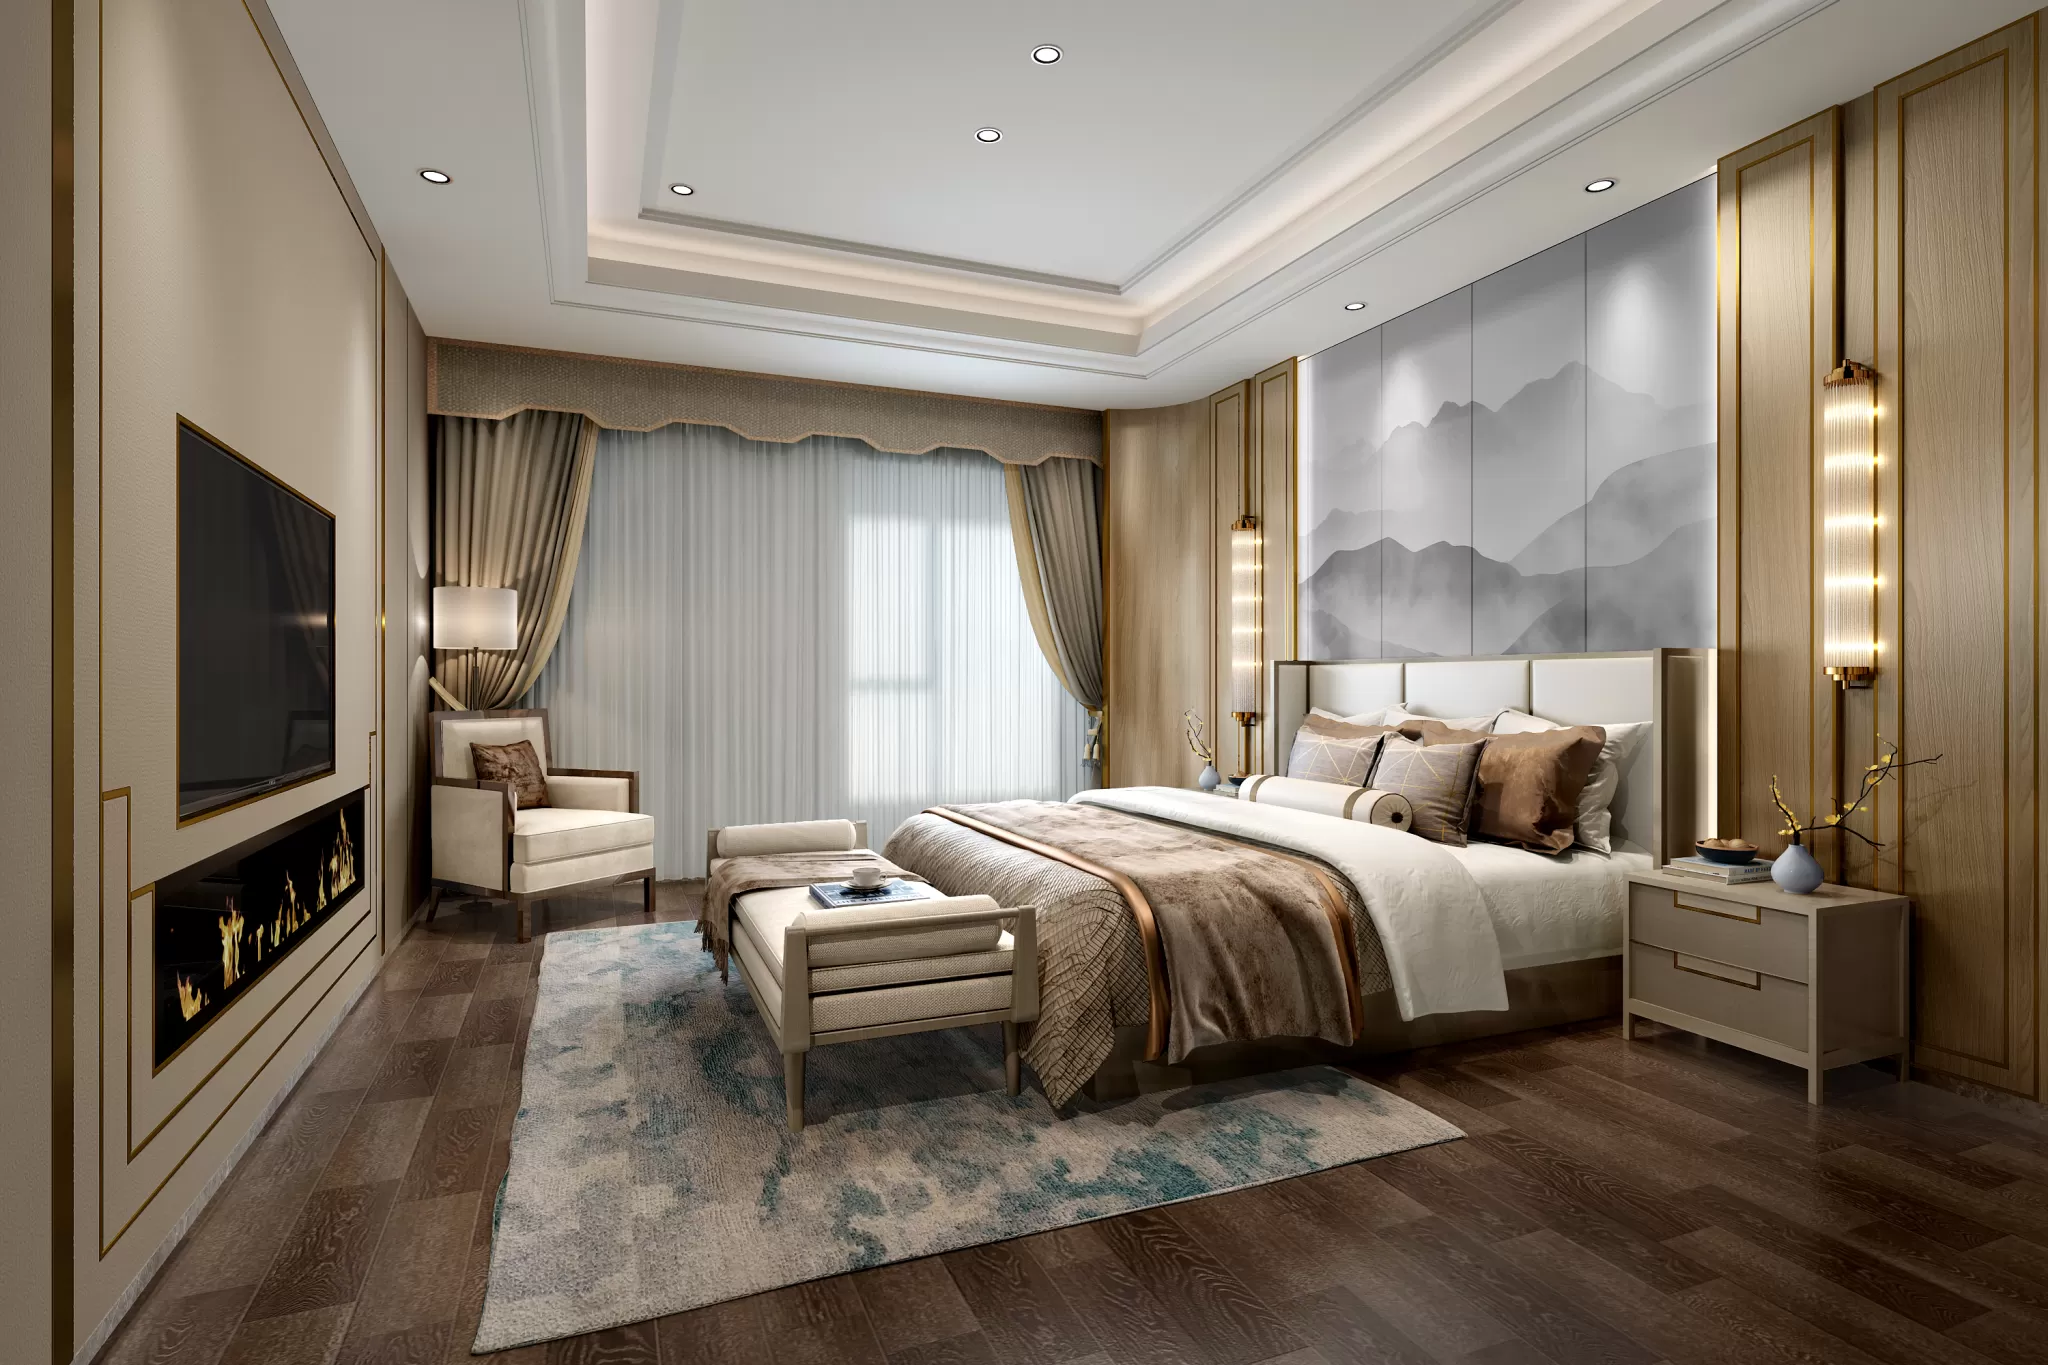 DESMOD INTERIOR 2021 (VRAY)/5. BEDROOM – 2. CHINESE STYLES – 009